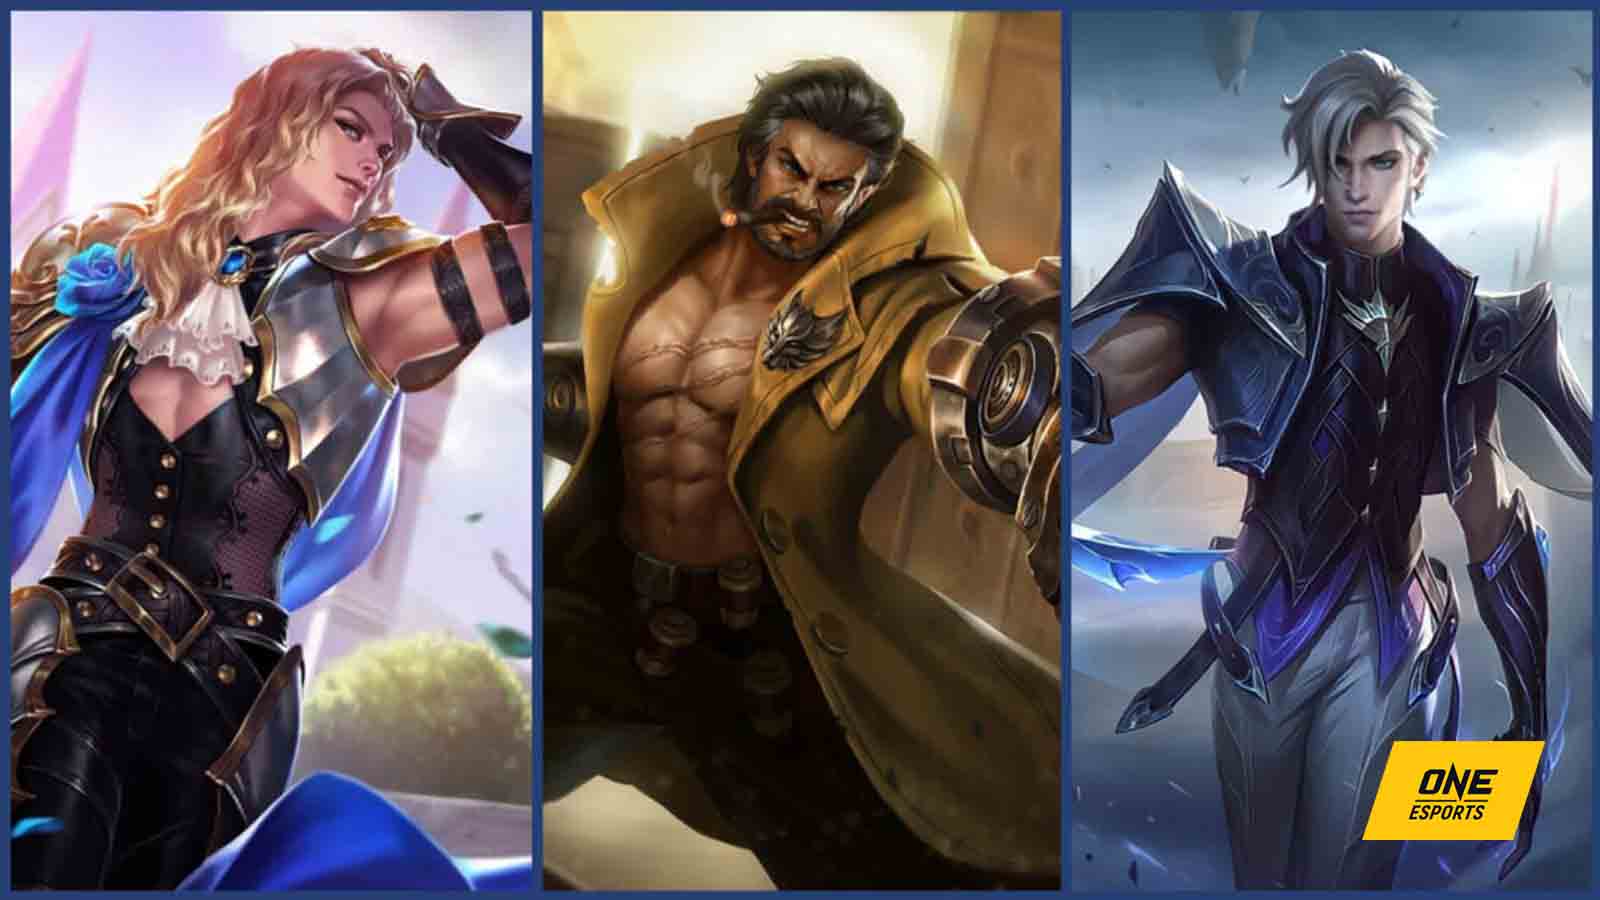 The 5 most handsome Mobile Legends heroes | ONE Esports